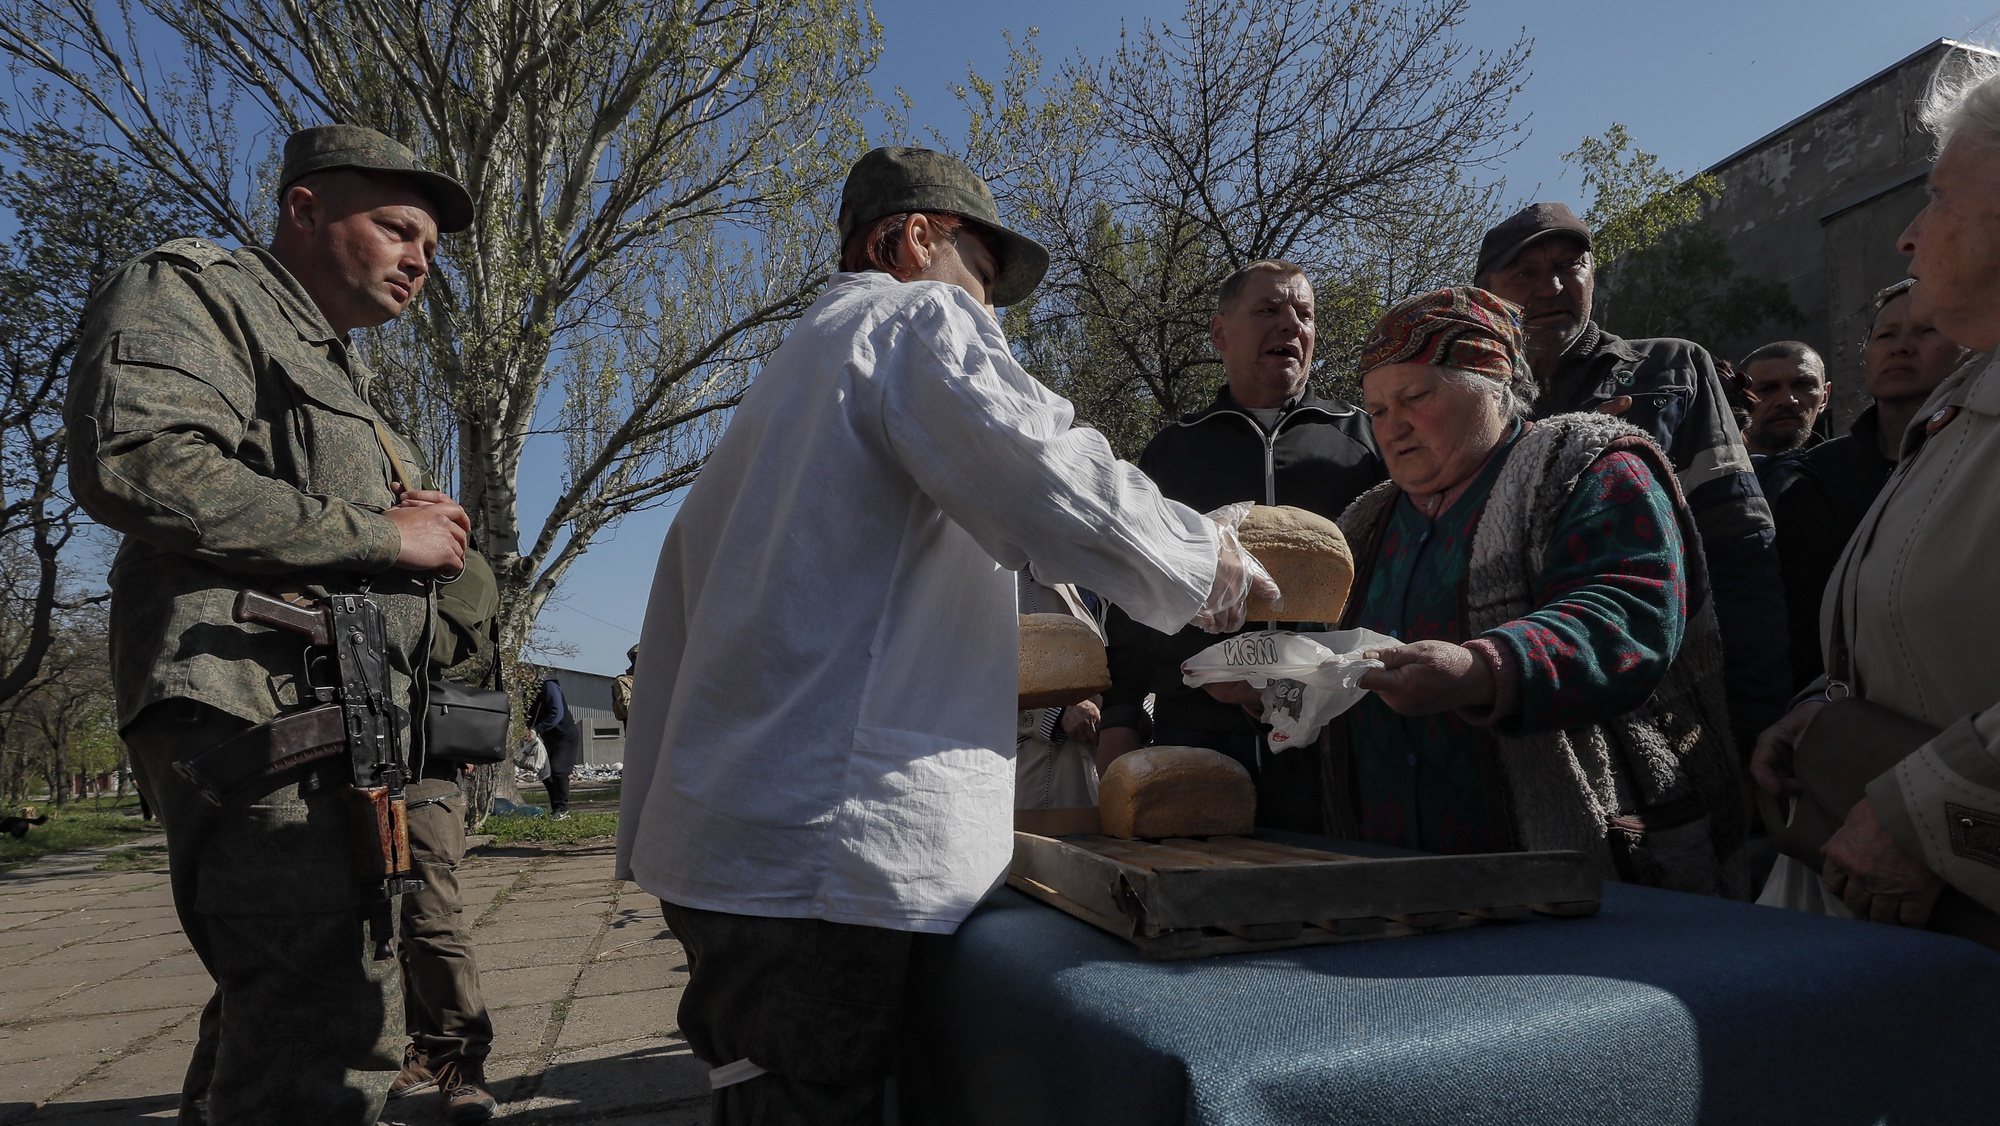 epa09917331 A picture taken during a visit to Luhansk organized by the Russian military shows servicemen of the self-proclaimed Donetsk People&#039;s Republic distribute bread to local people during distributing humanitarian aid in Mariupol, Ukraine, 29 April 2022. According to Eduard Basurin, spokesman of the self-proclaimed Donetsk People&#039;s Republic (DPR): &#039;after two months of continued hostility in the city, the main battles in Mariupol are over&#039;. On 24 February Russian troops had entered Ukrainian territory in what the Russian president declared a &#039;special military operation&#039;, resulting in fighting and destruction in the country, a huge flow of refugees, and multiple sanctions against Russia.  EPA/SERGEI ILNITSKY